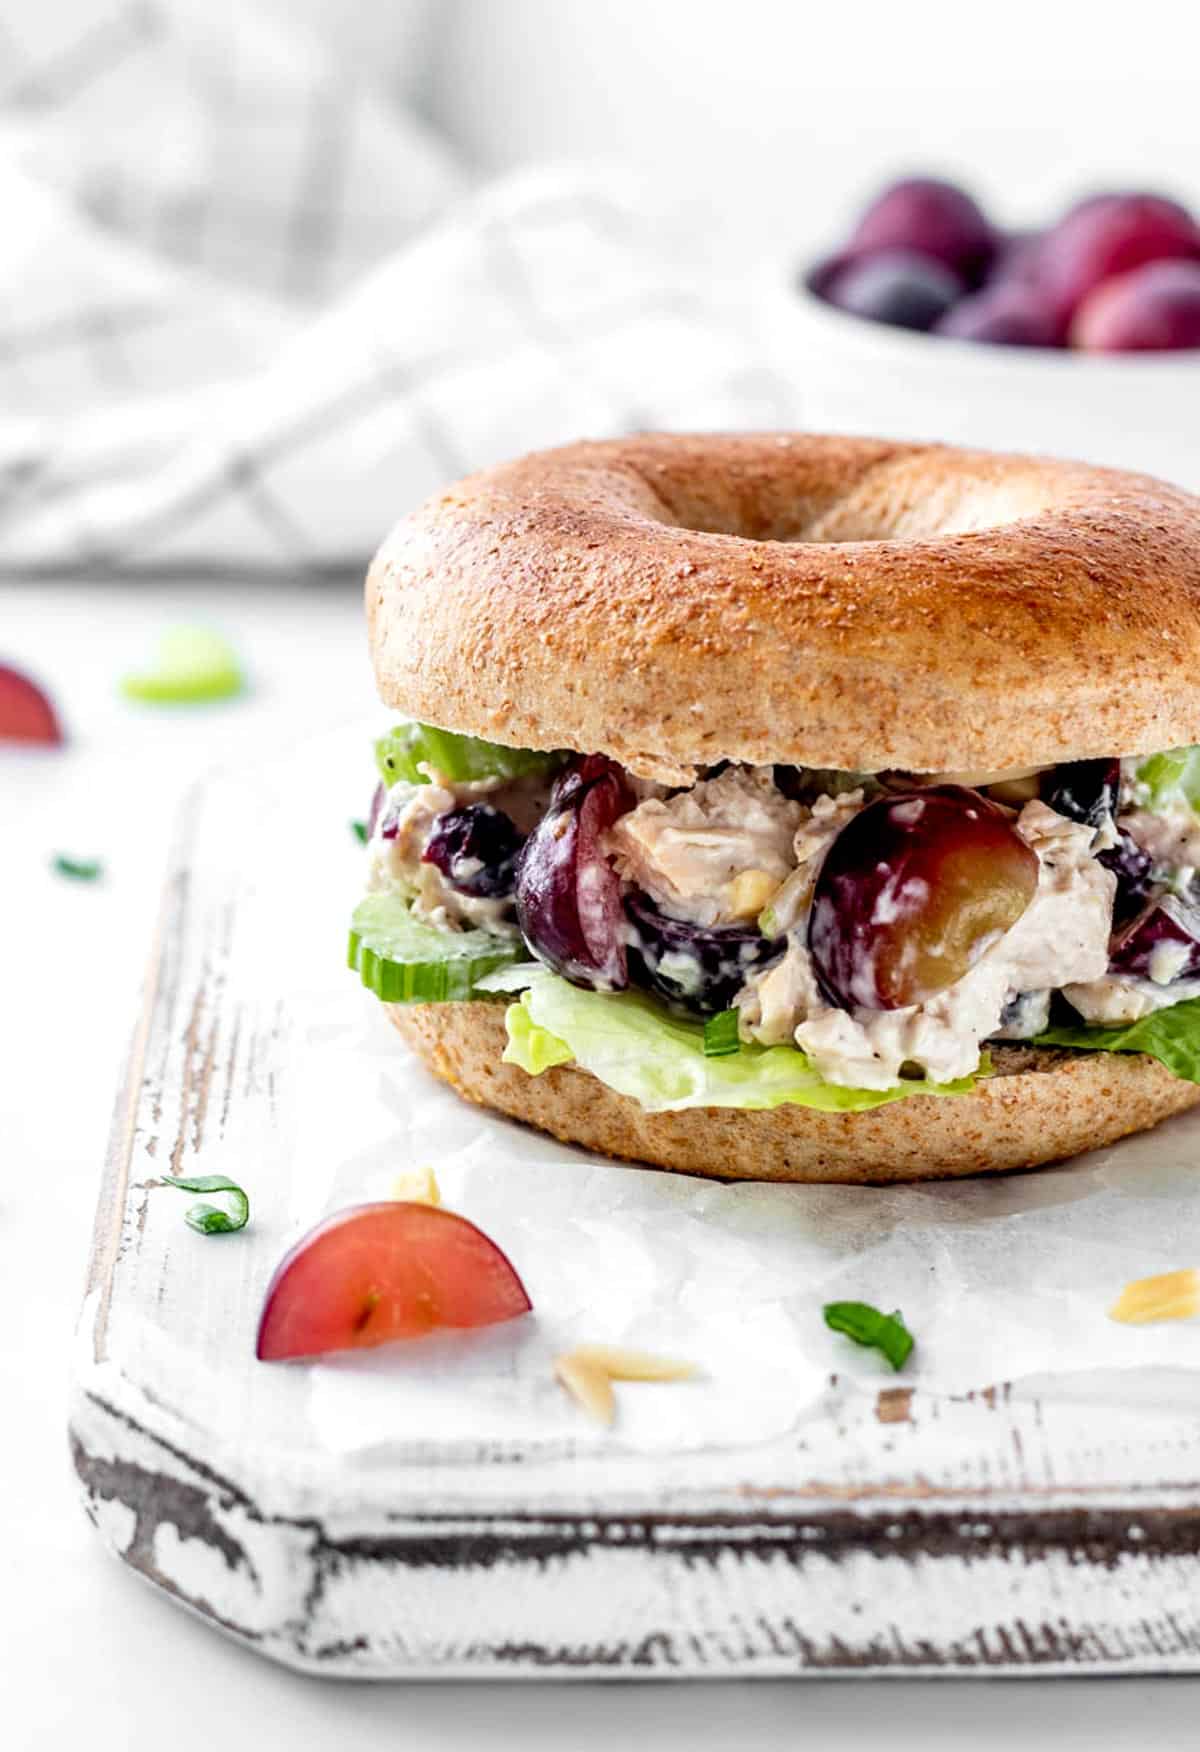 The healthy chicken salad with grapes and almonds on a bagel with lettuce.